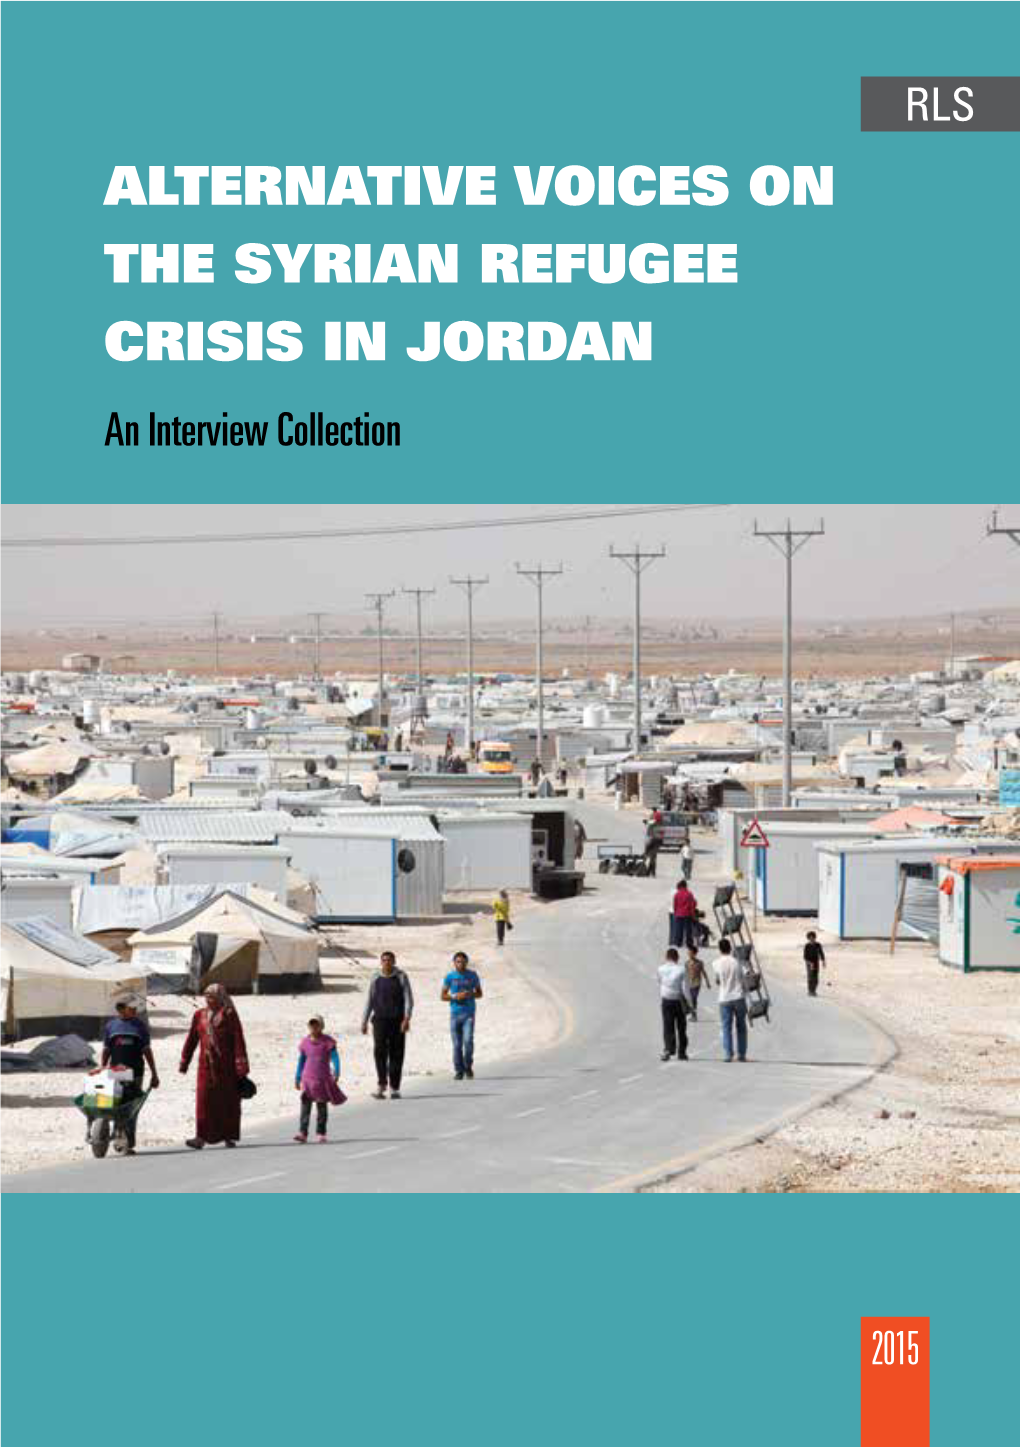 ALTERNATIVE VOICES on the SYRIAN REFUGEE CRISIS in JORDAN an Interview Collection